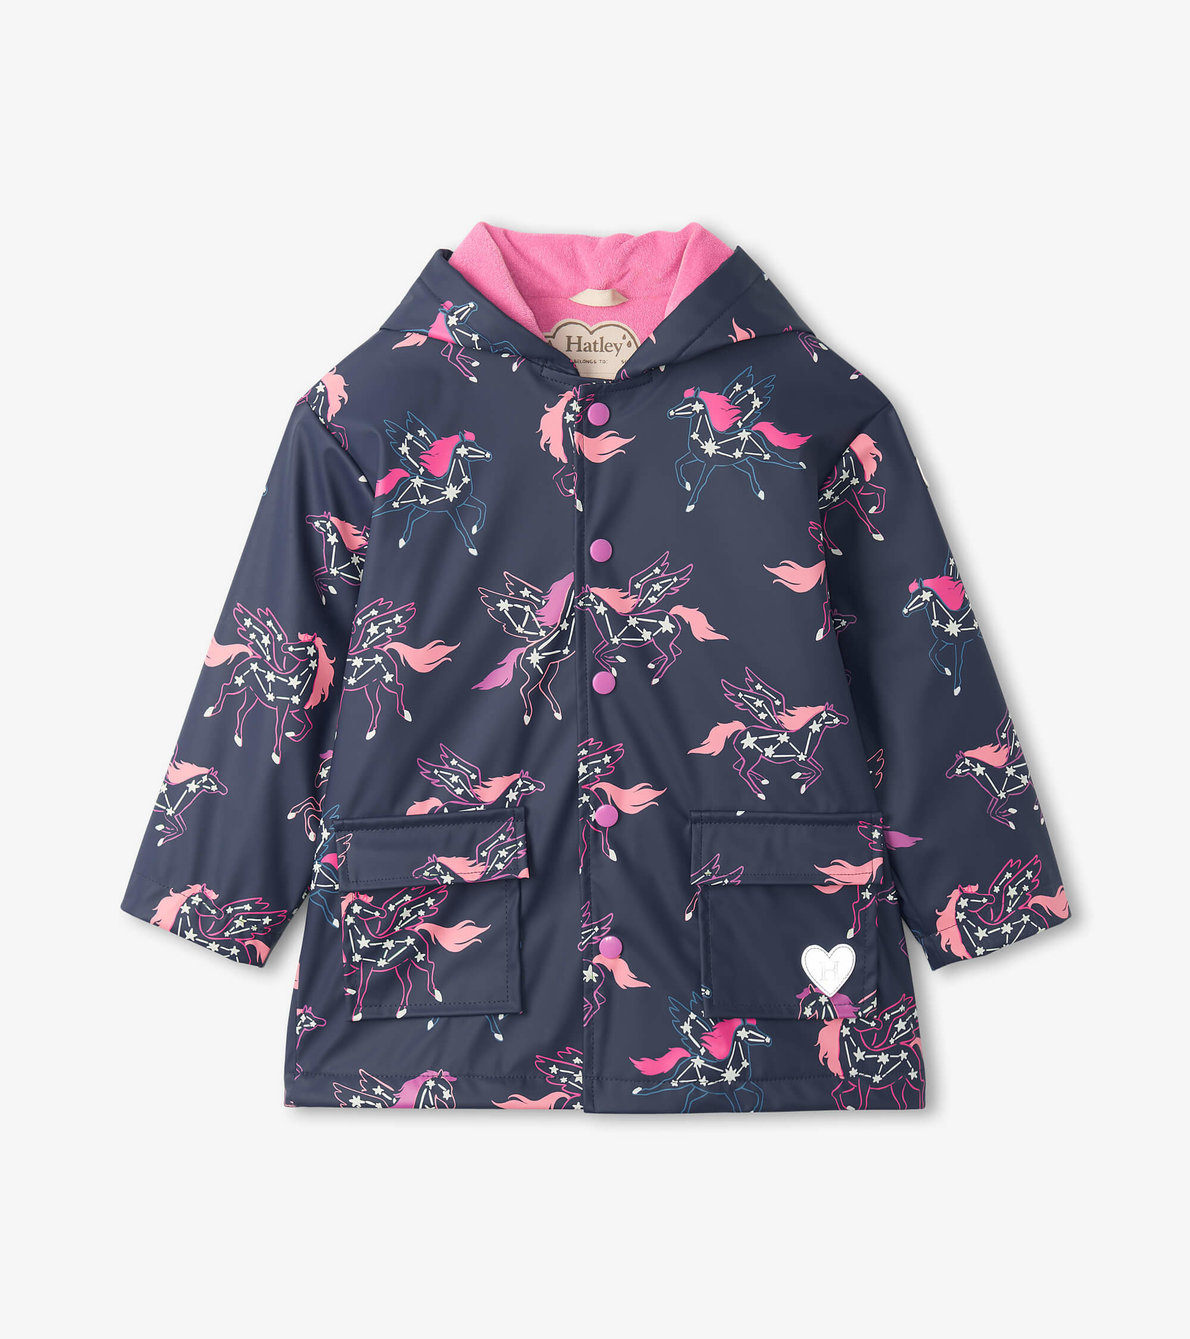 View larger image of Girls Unicorn Constellations Colour Changing Button-Up Rain Jacket